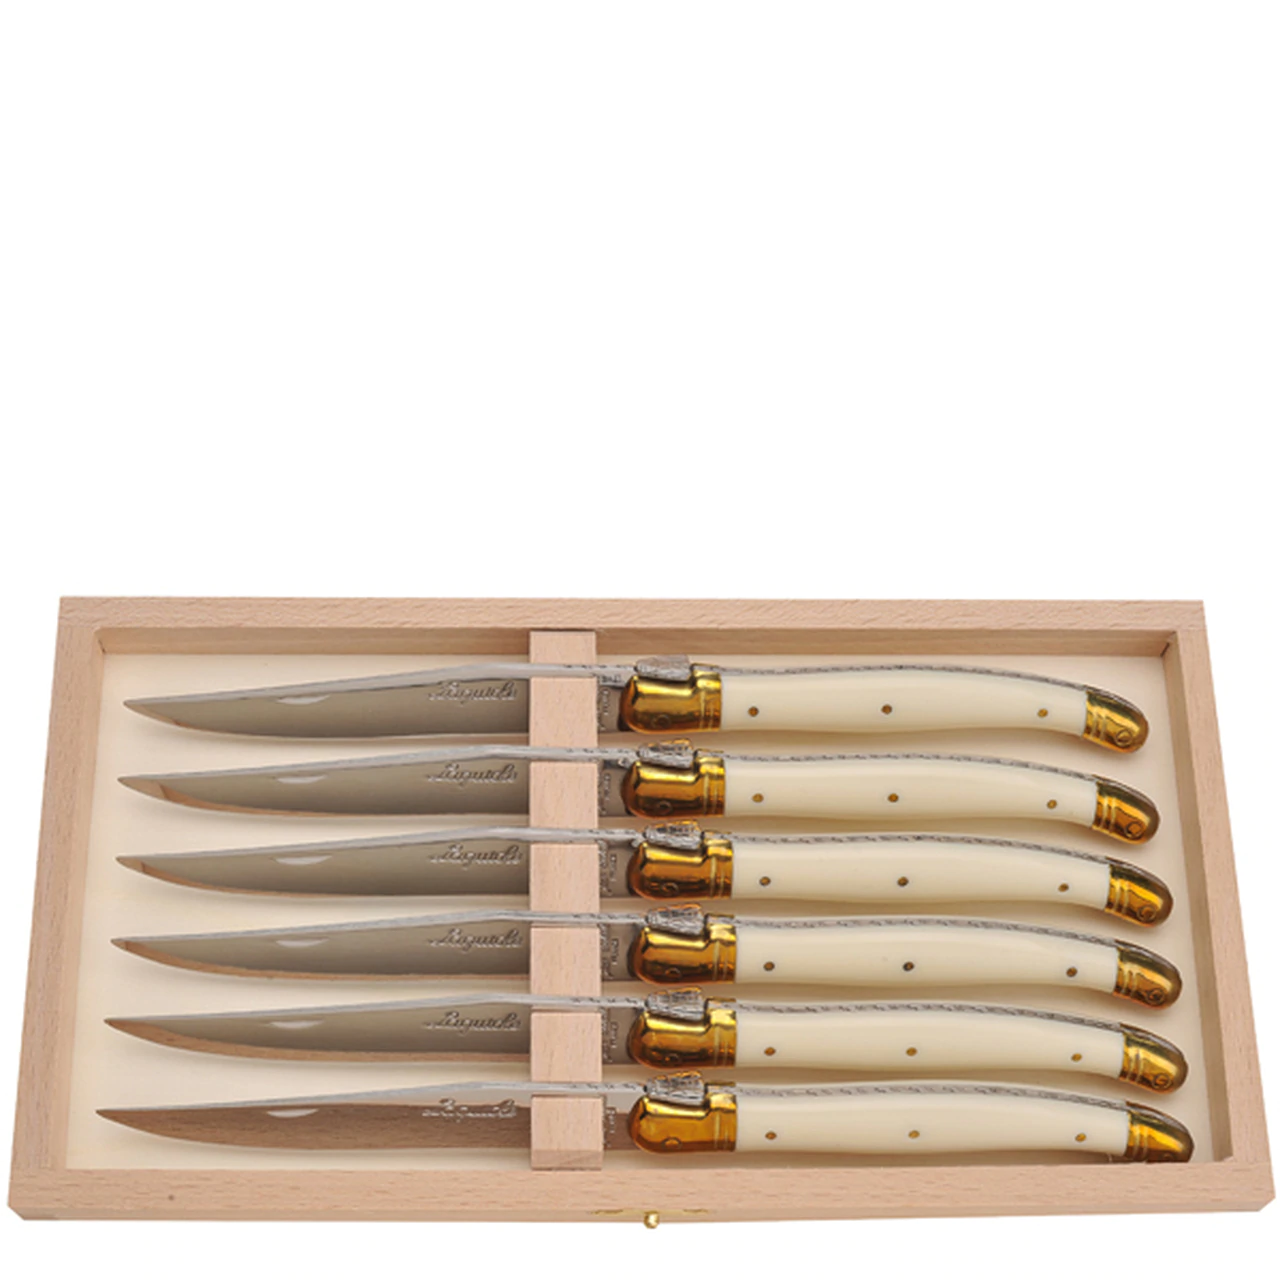 Jean Dubost Laguiole Carving Set with Black Handles